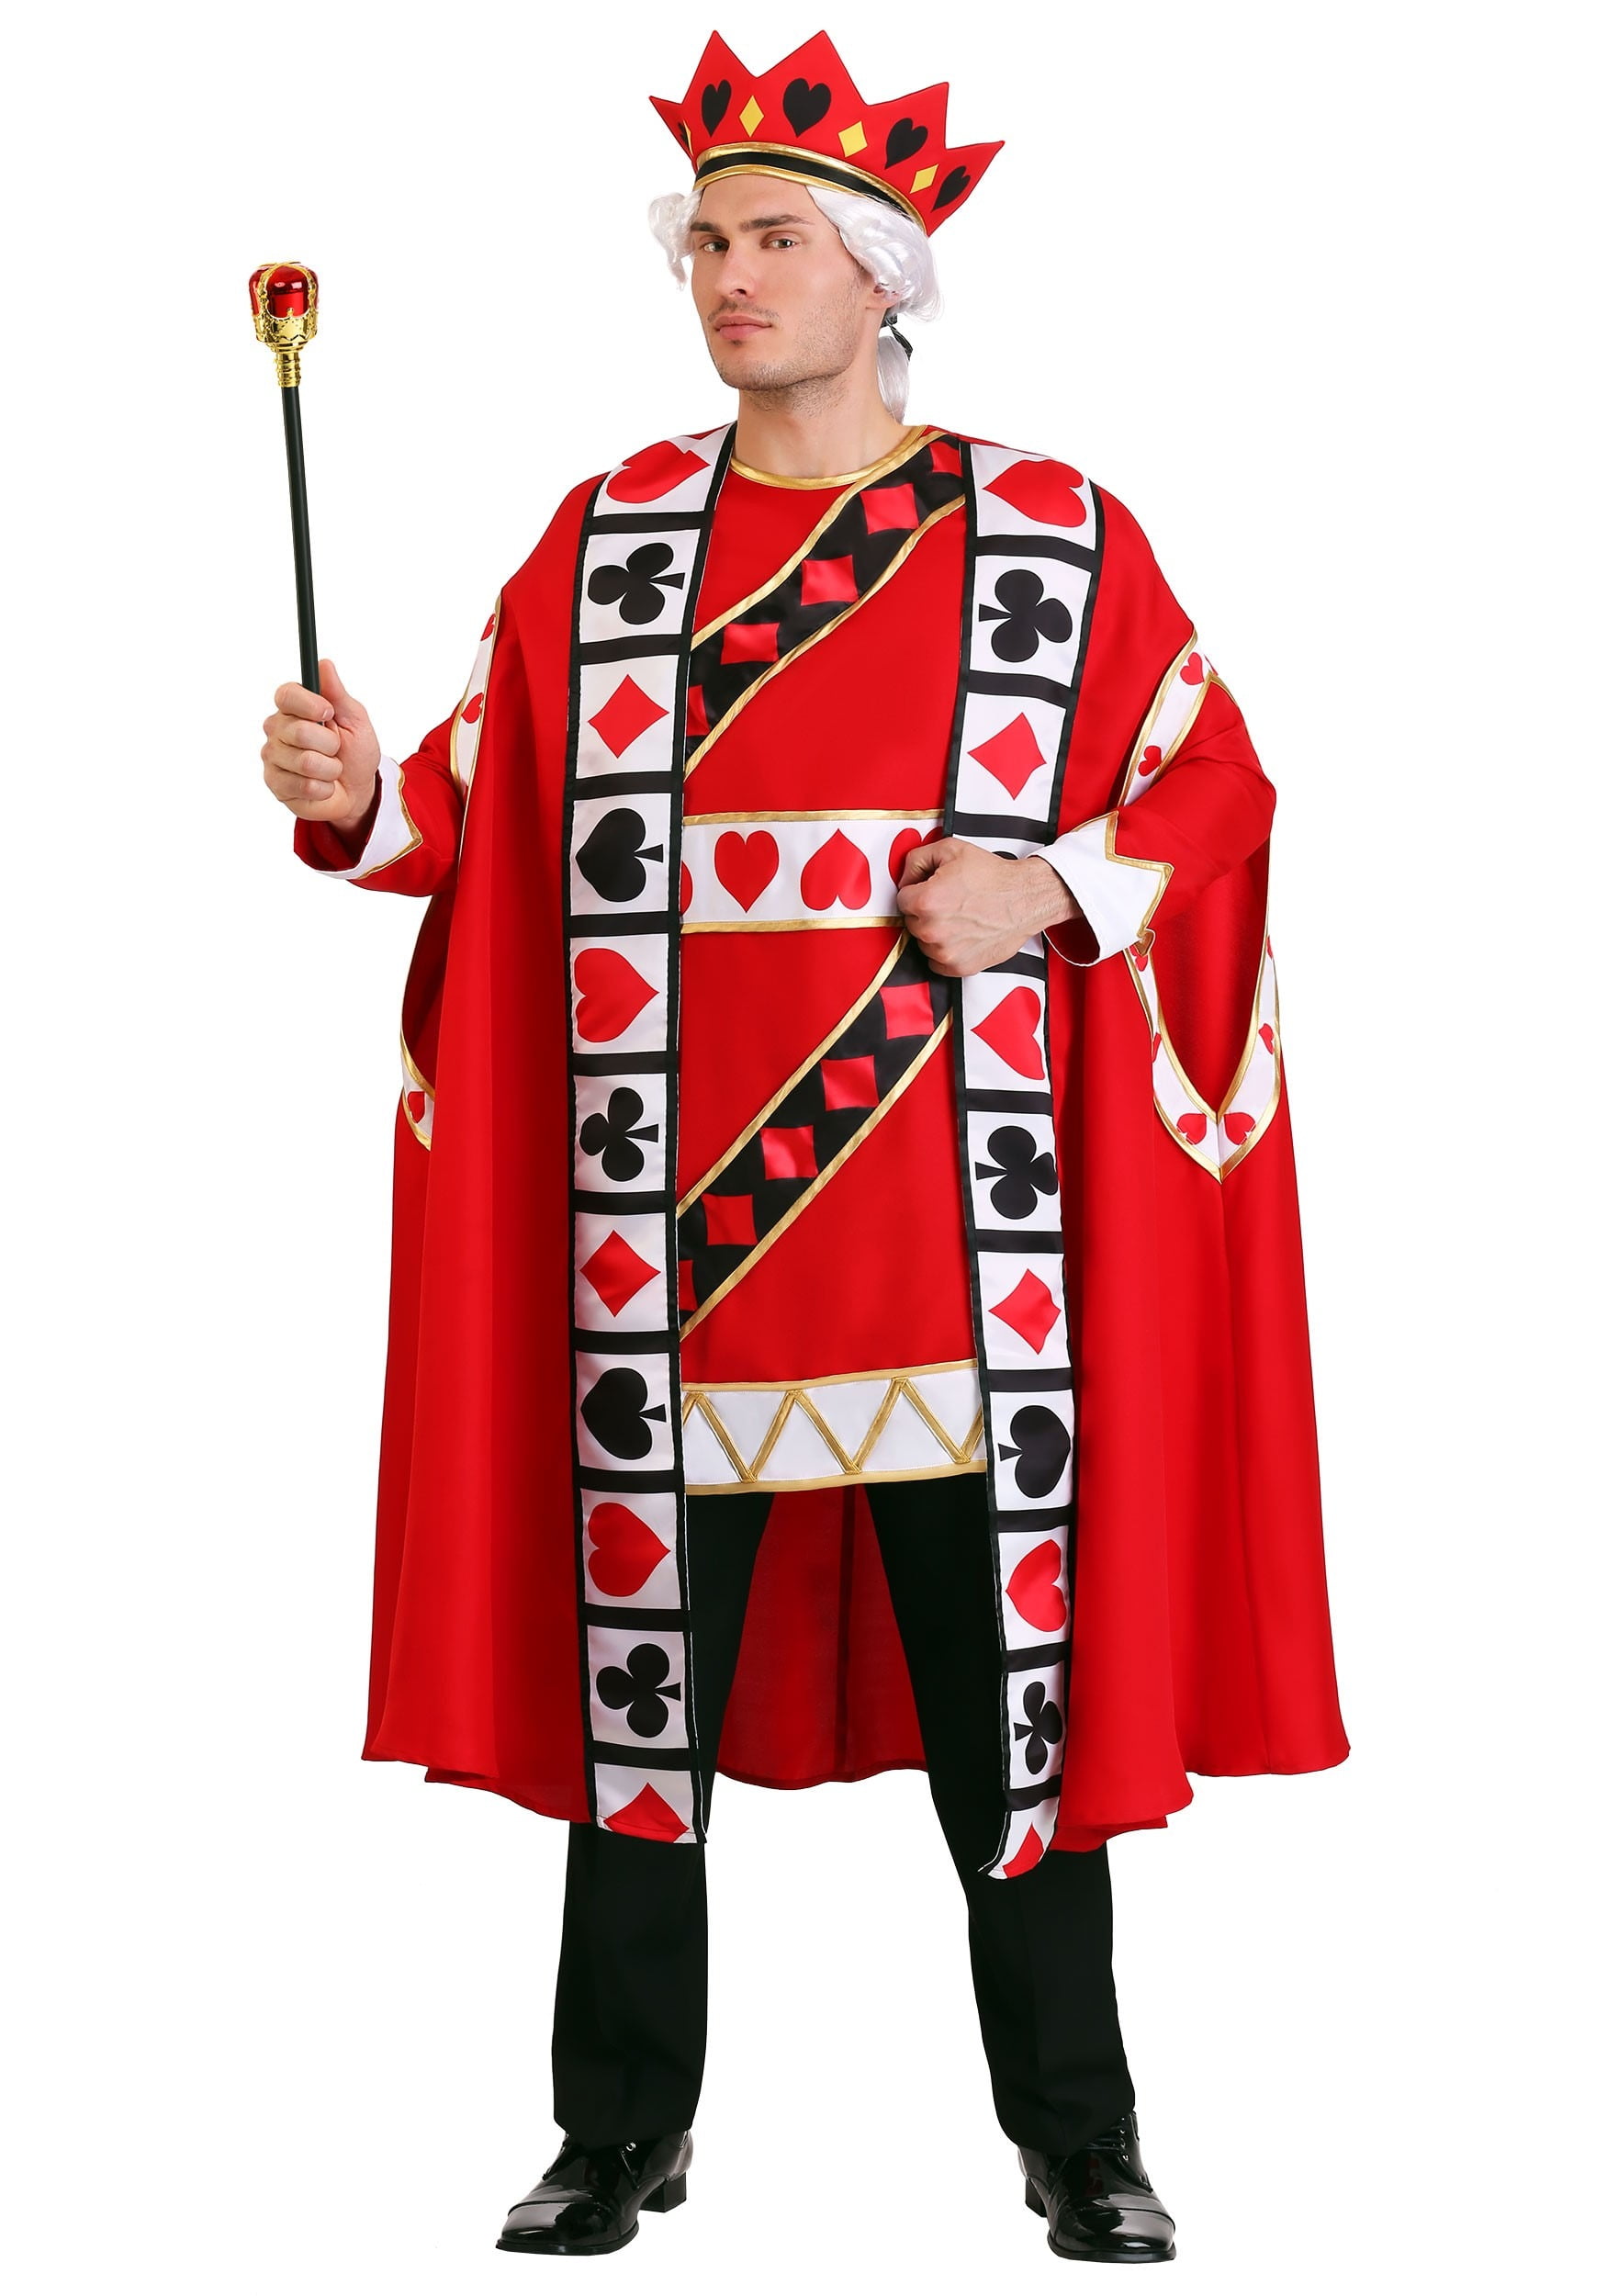 Playing Card King Costume - NOVELTY, HUMEROUS CROSS-DRESSING